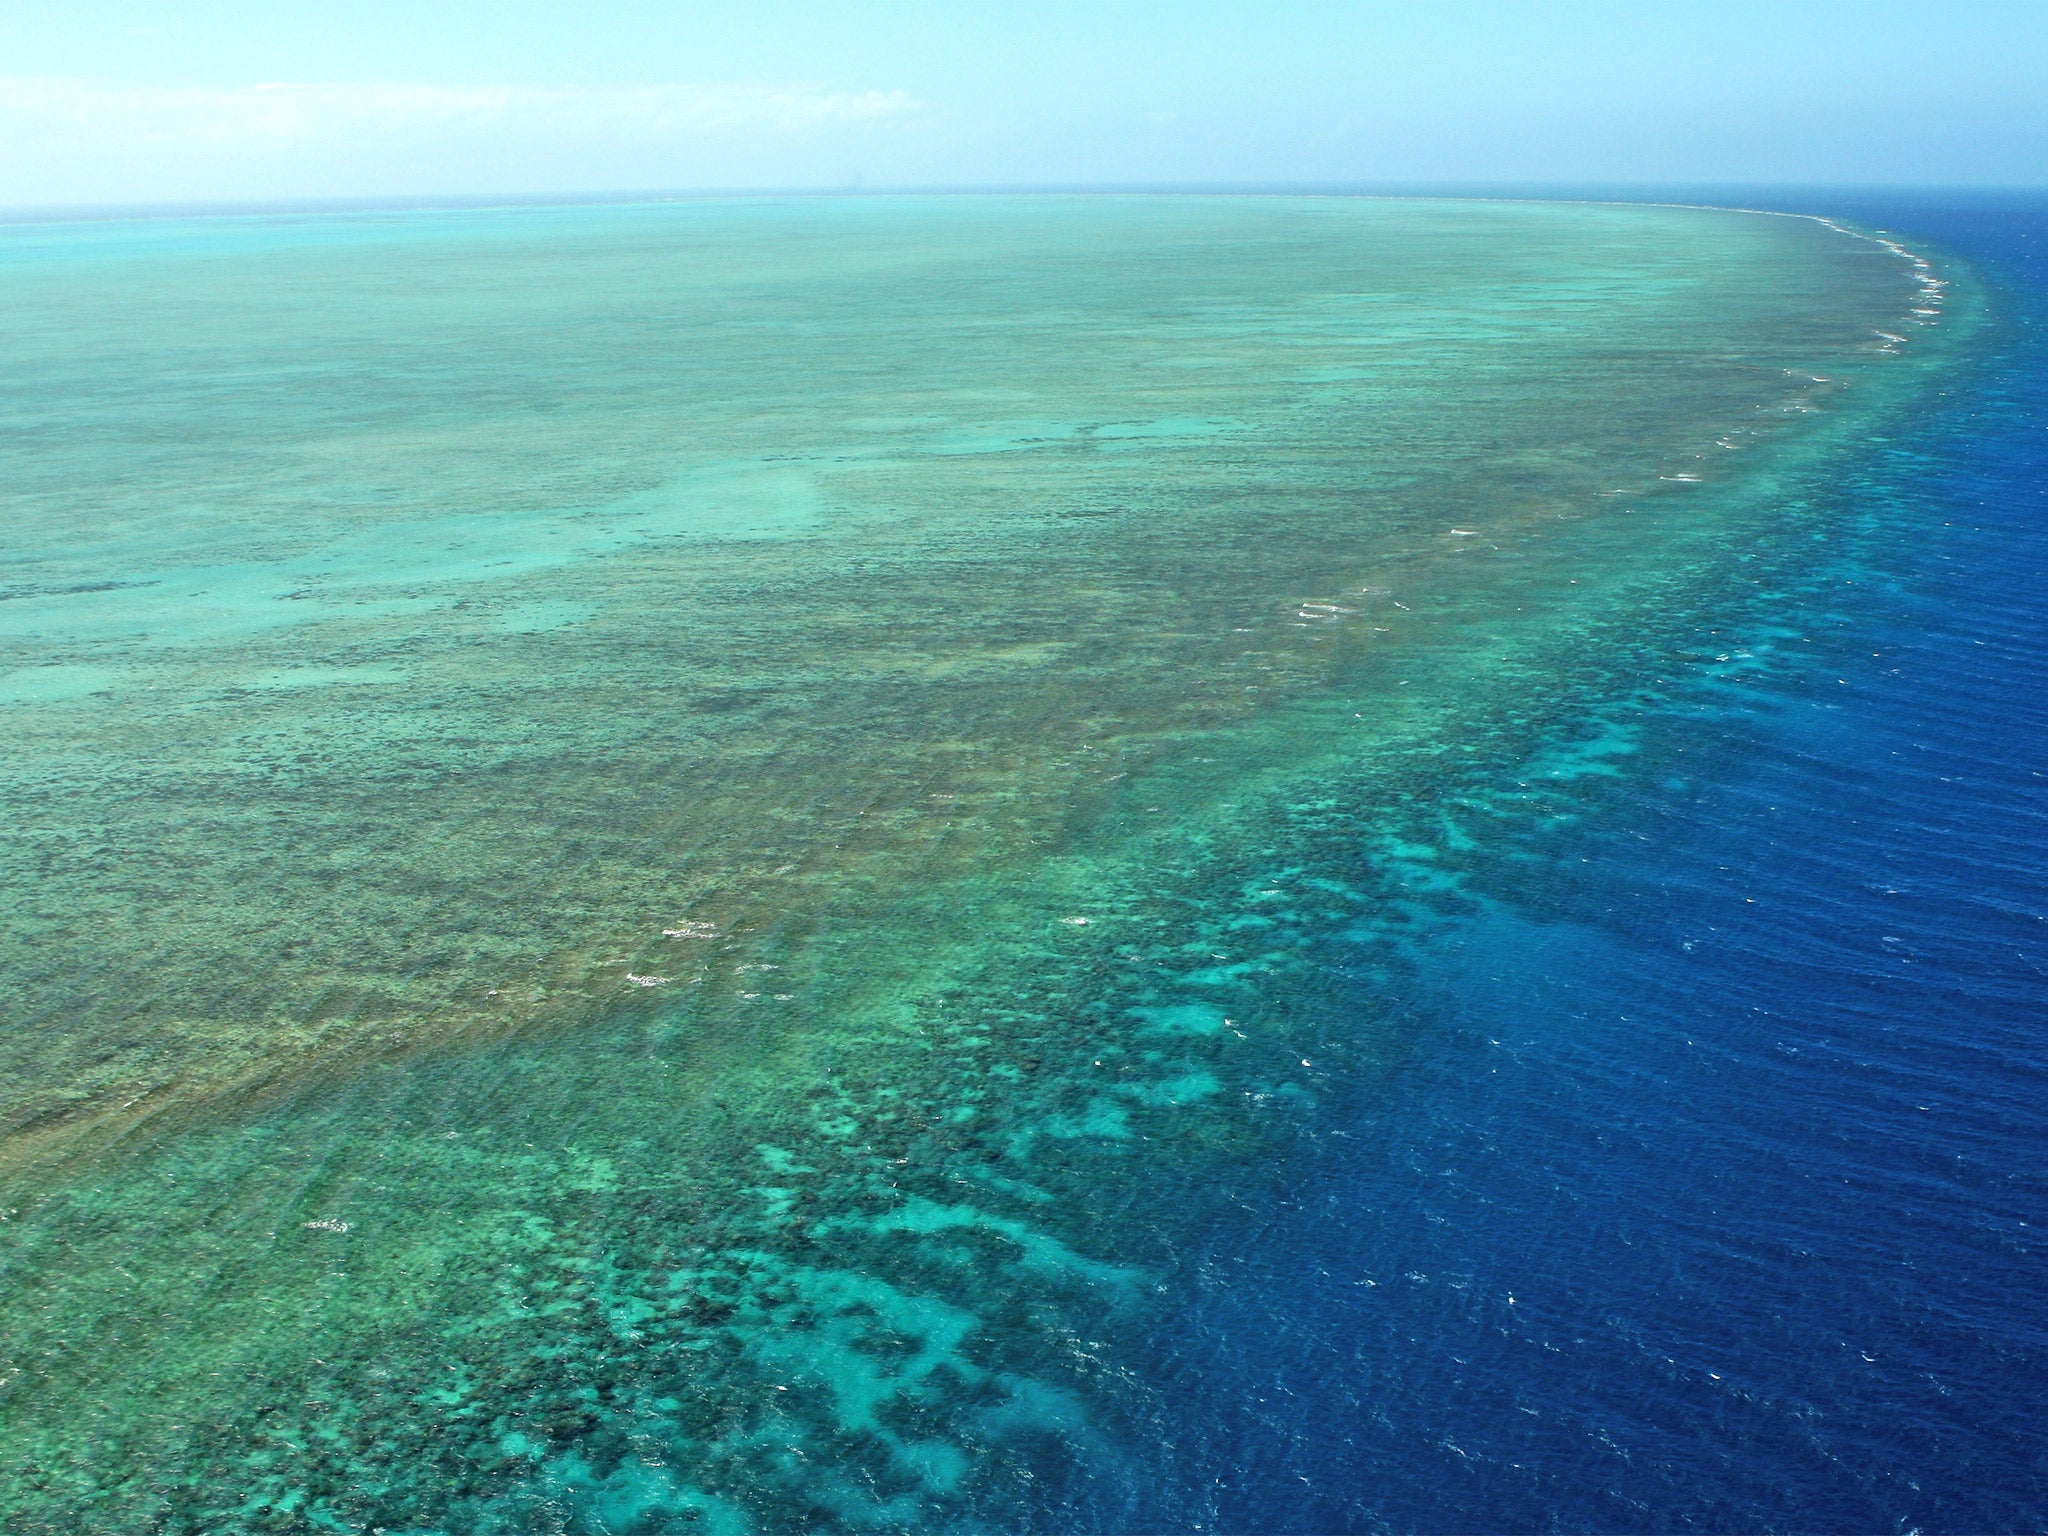 The Great Barrier Reef faces multiple threats